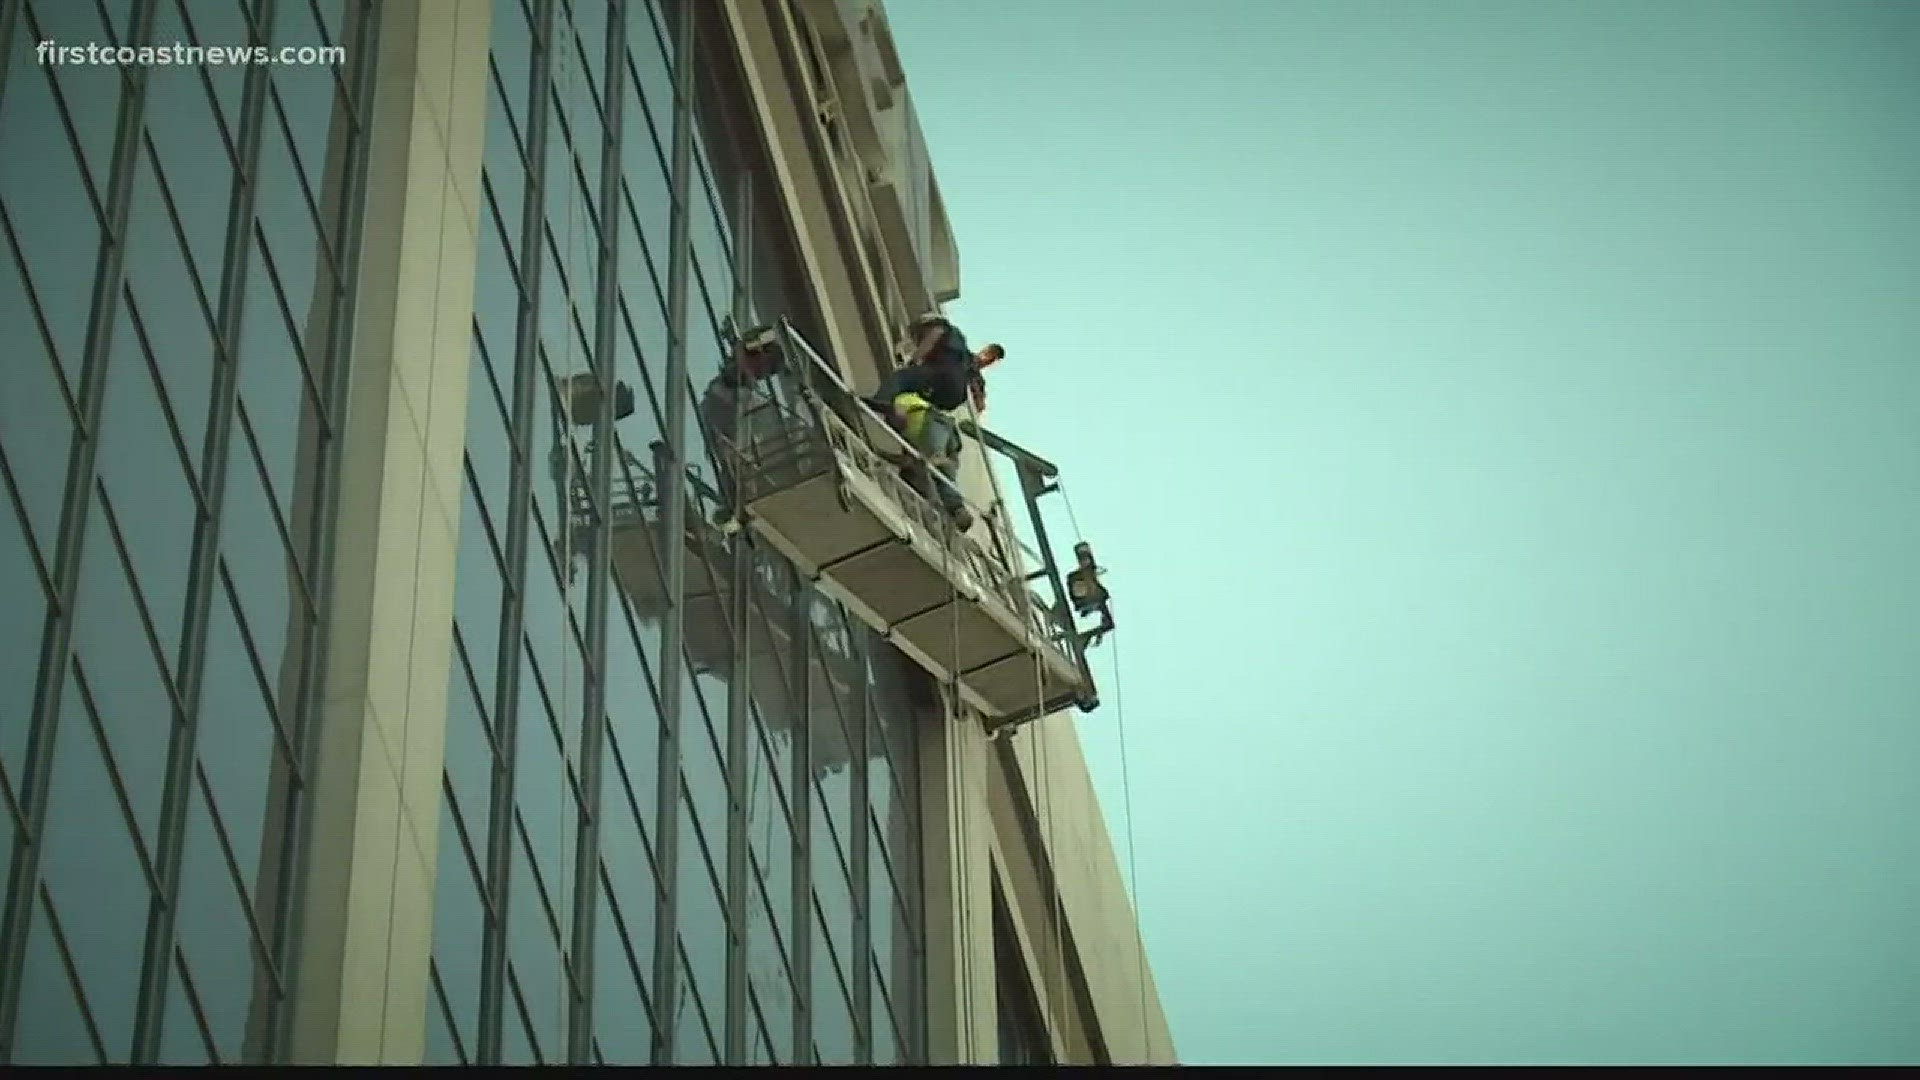 Special operation rescue workers at JFRD save the lives of two window washers hanging off the side of the BBT building in Downtown Jacksonville.